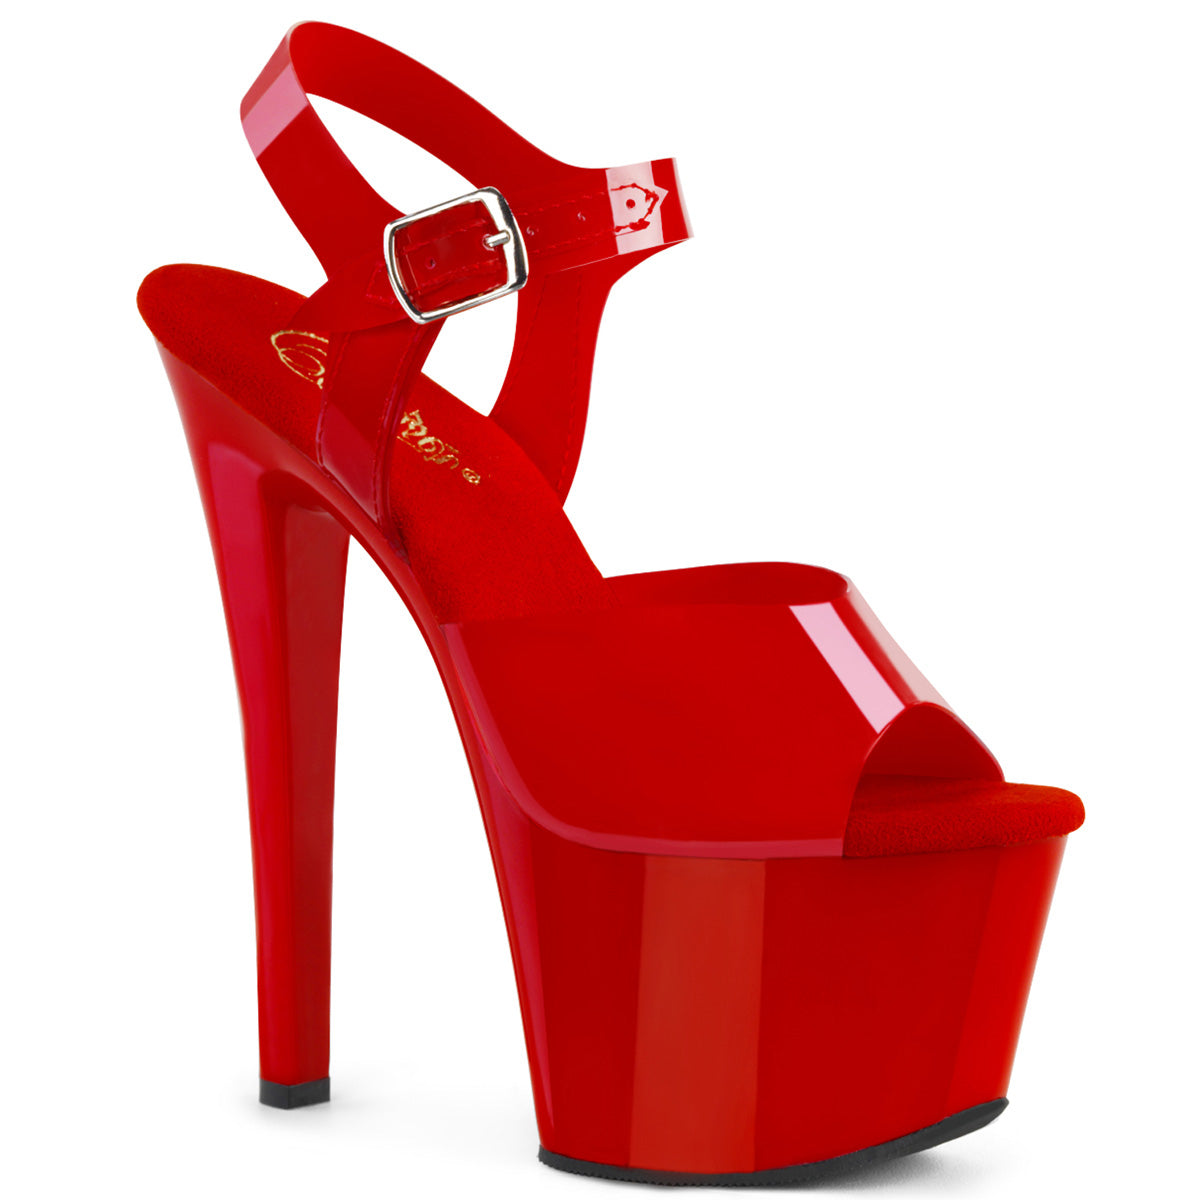 SKY-308N Pleaser 7 Inch Heel Red Pole Dancing Platforms-Pleaser- Sexy Shoes